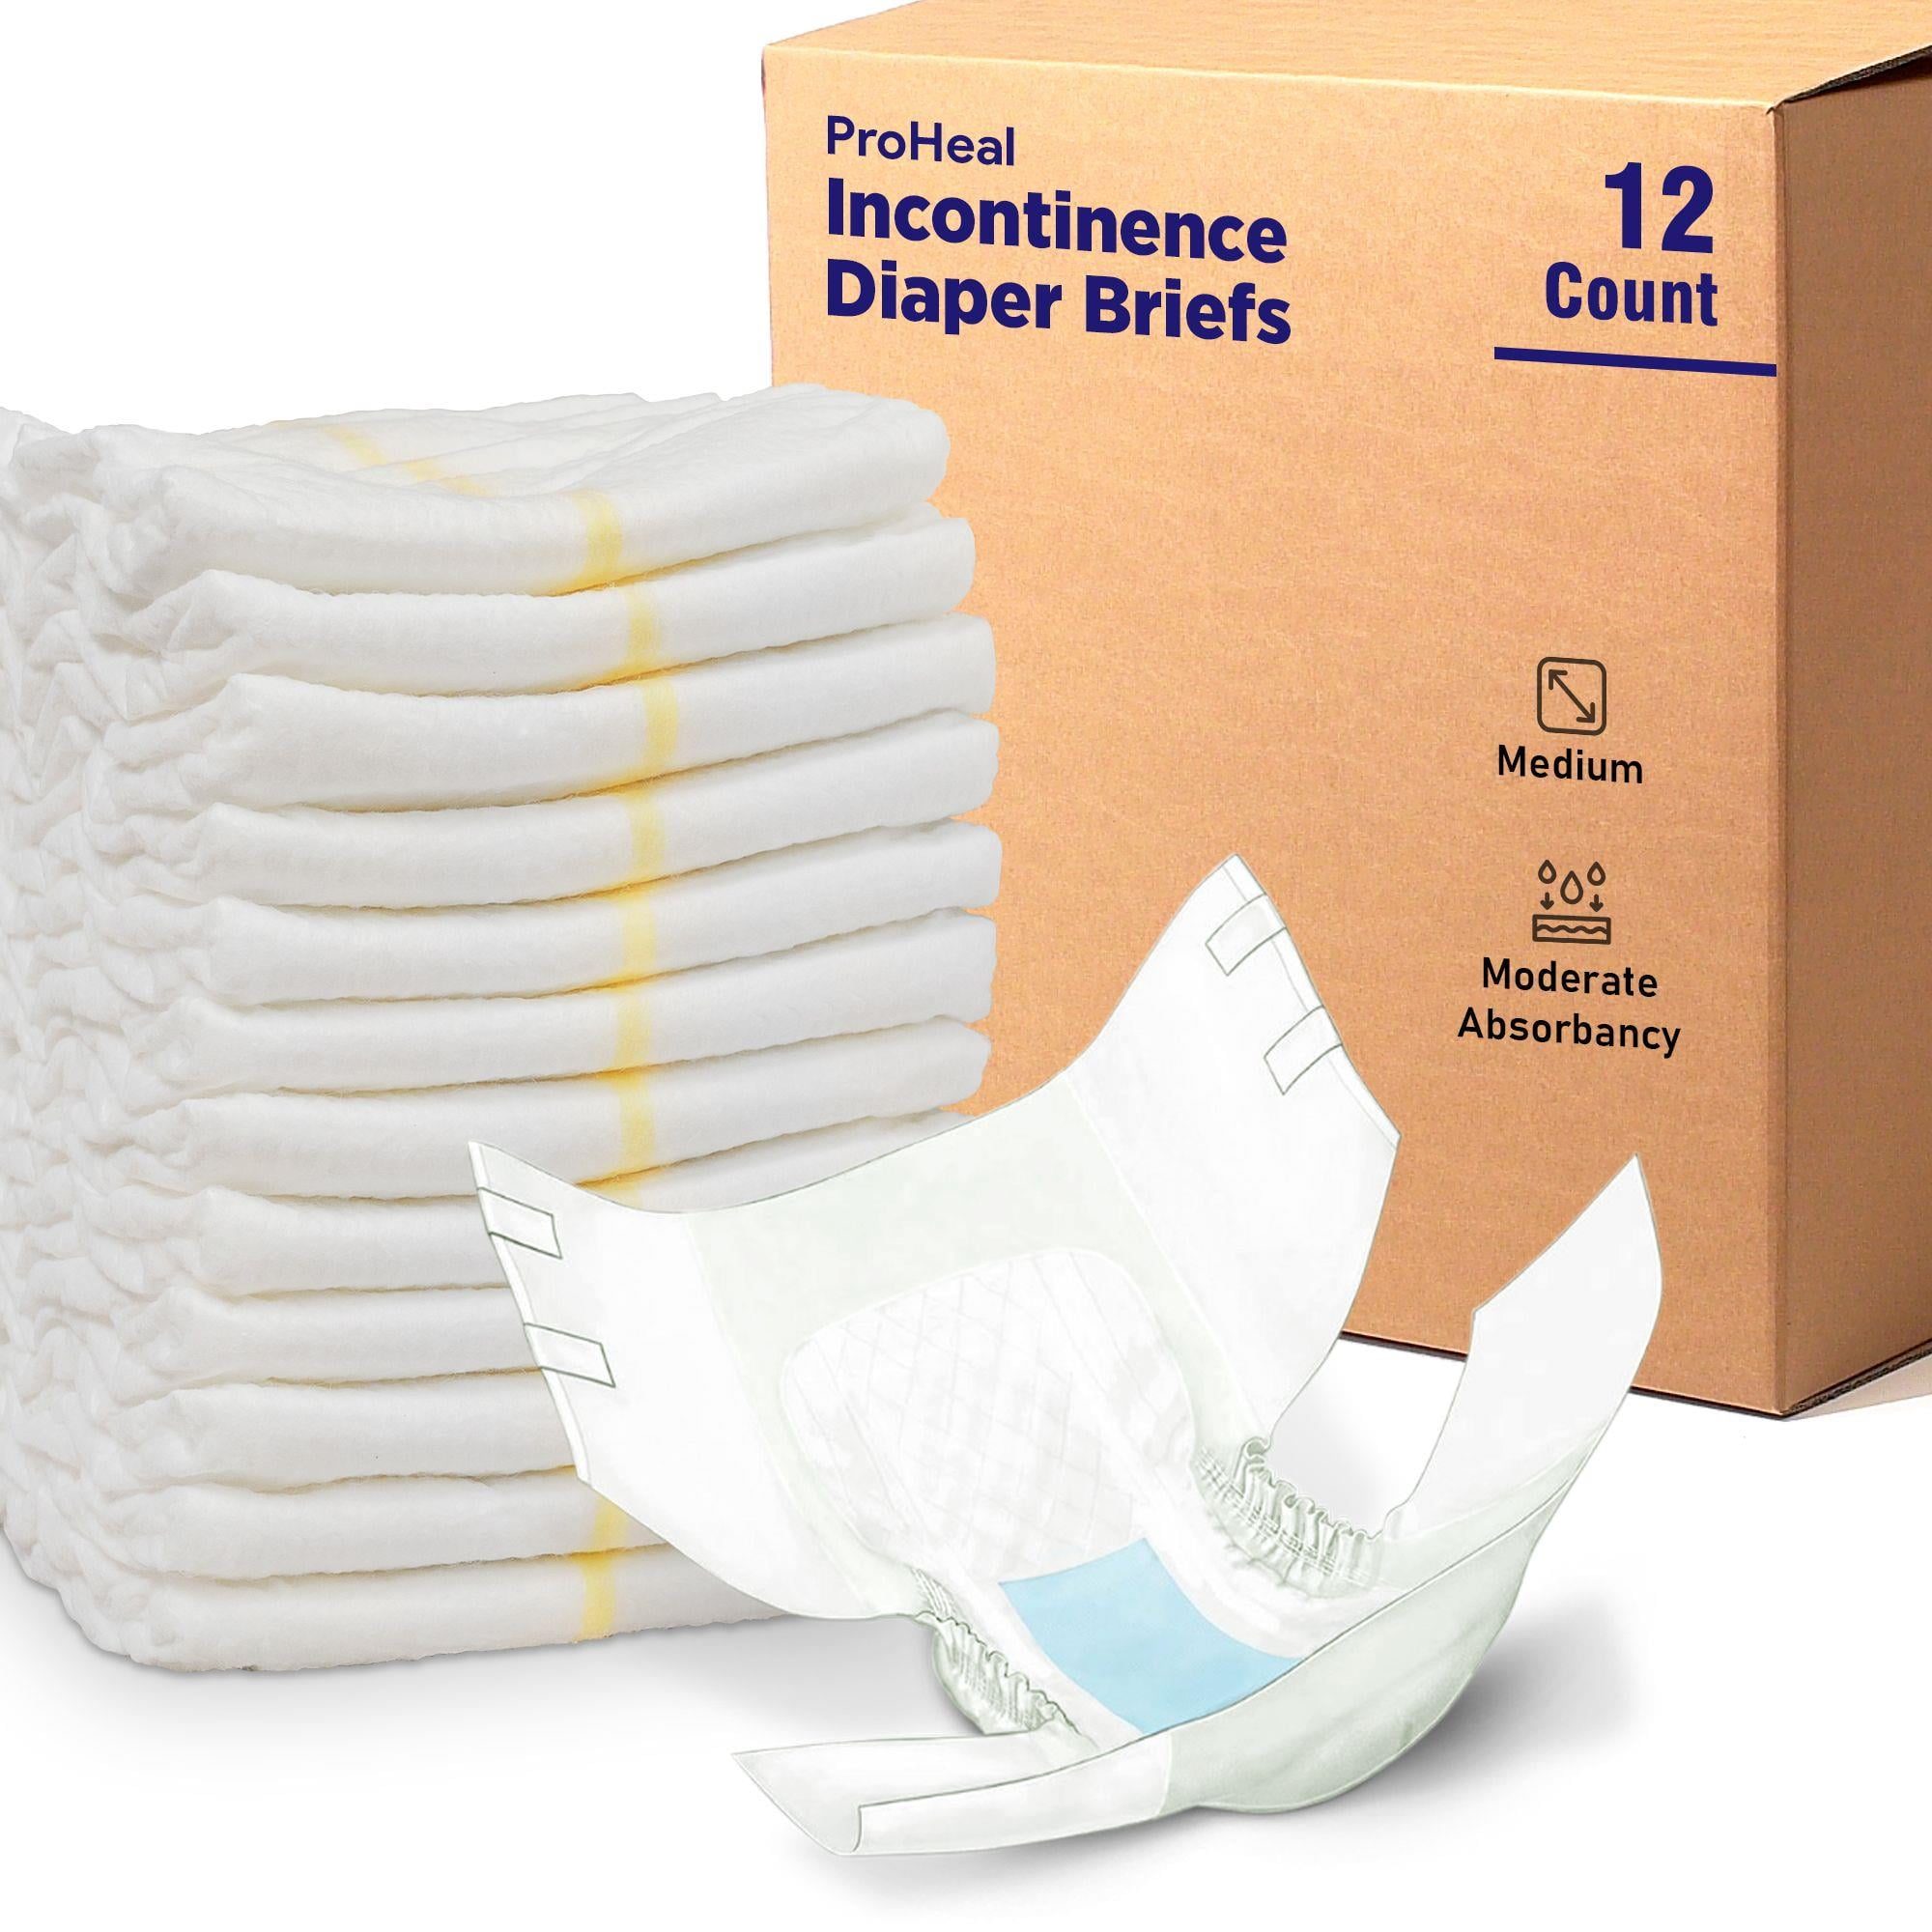 Proheal Unisex Adult Incontinence Briefs (12 Pack, M) Moderate